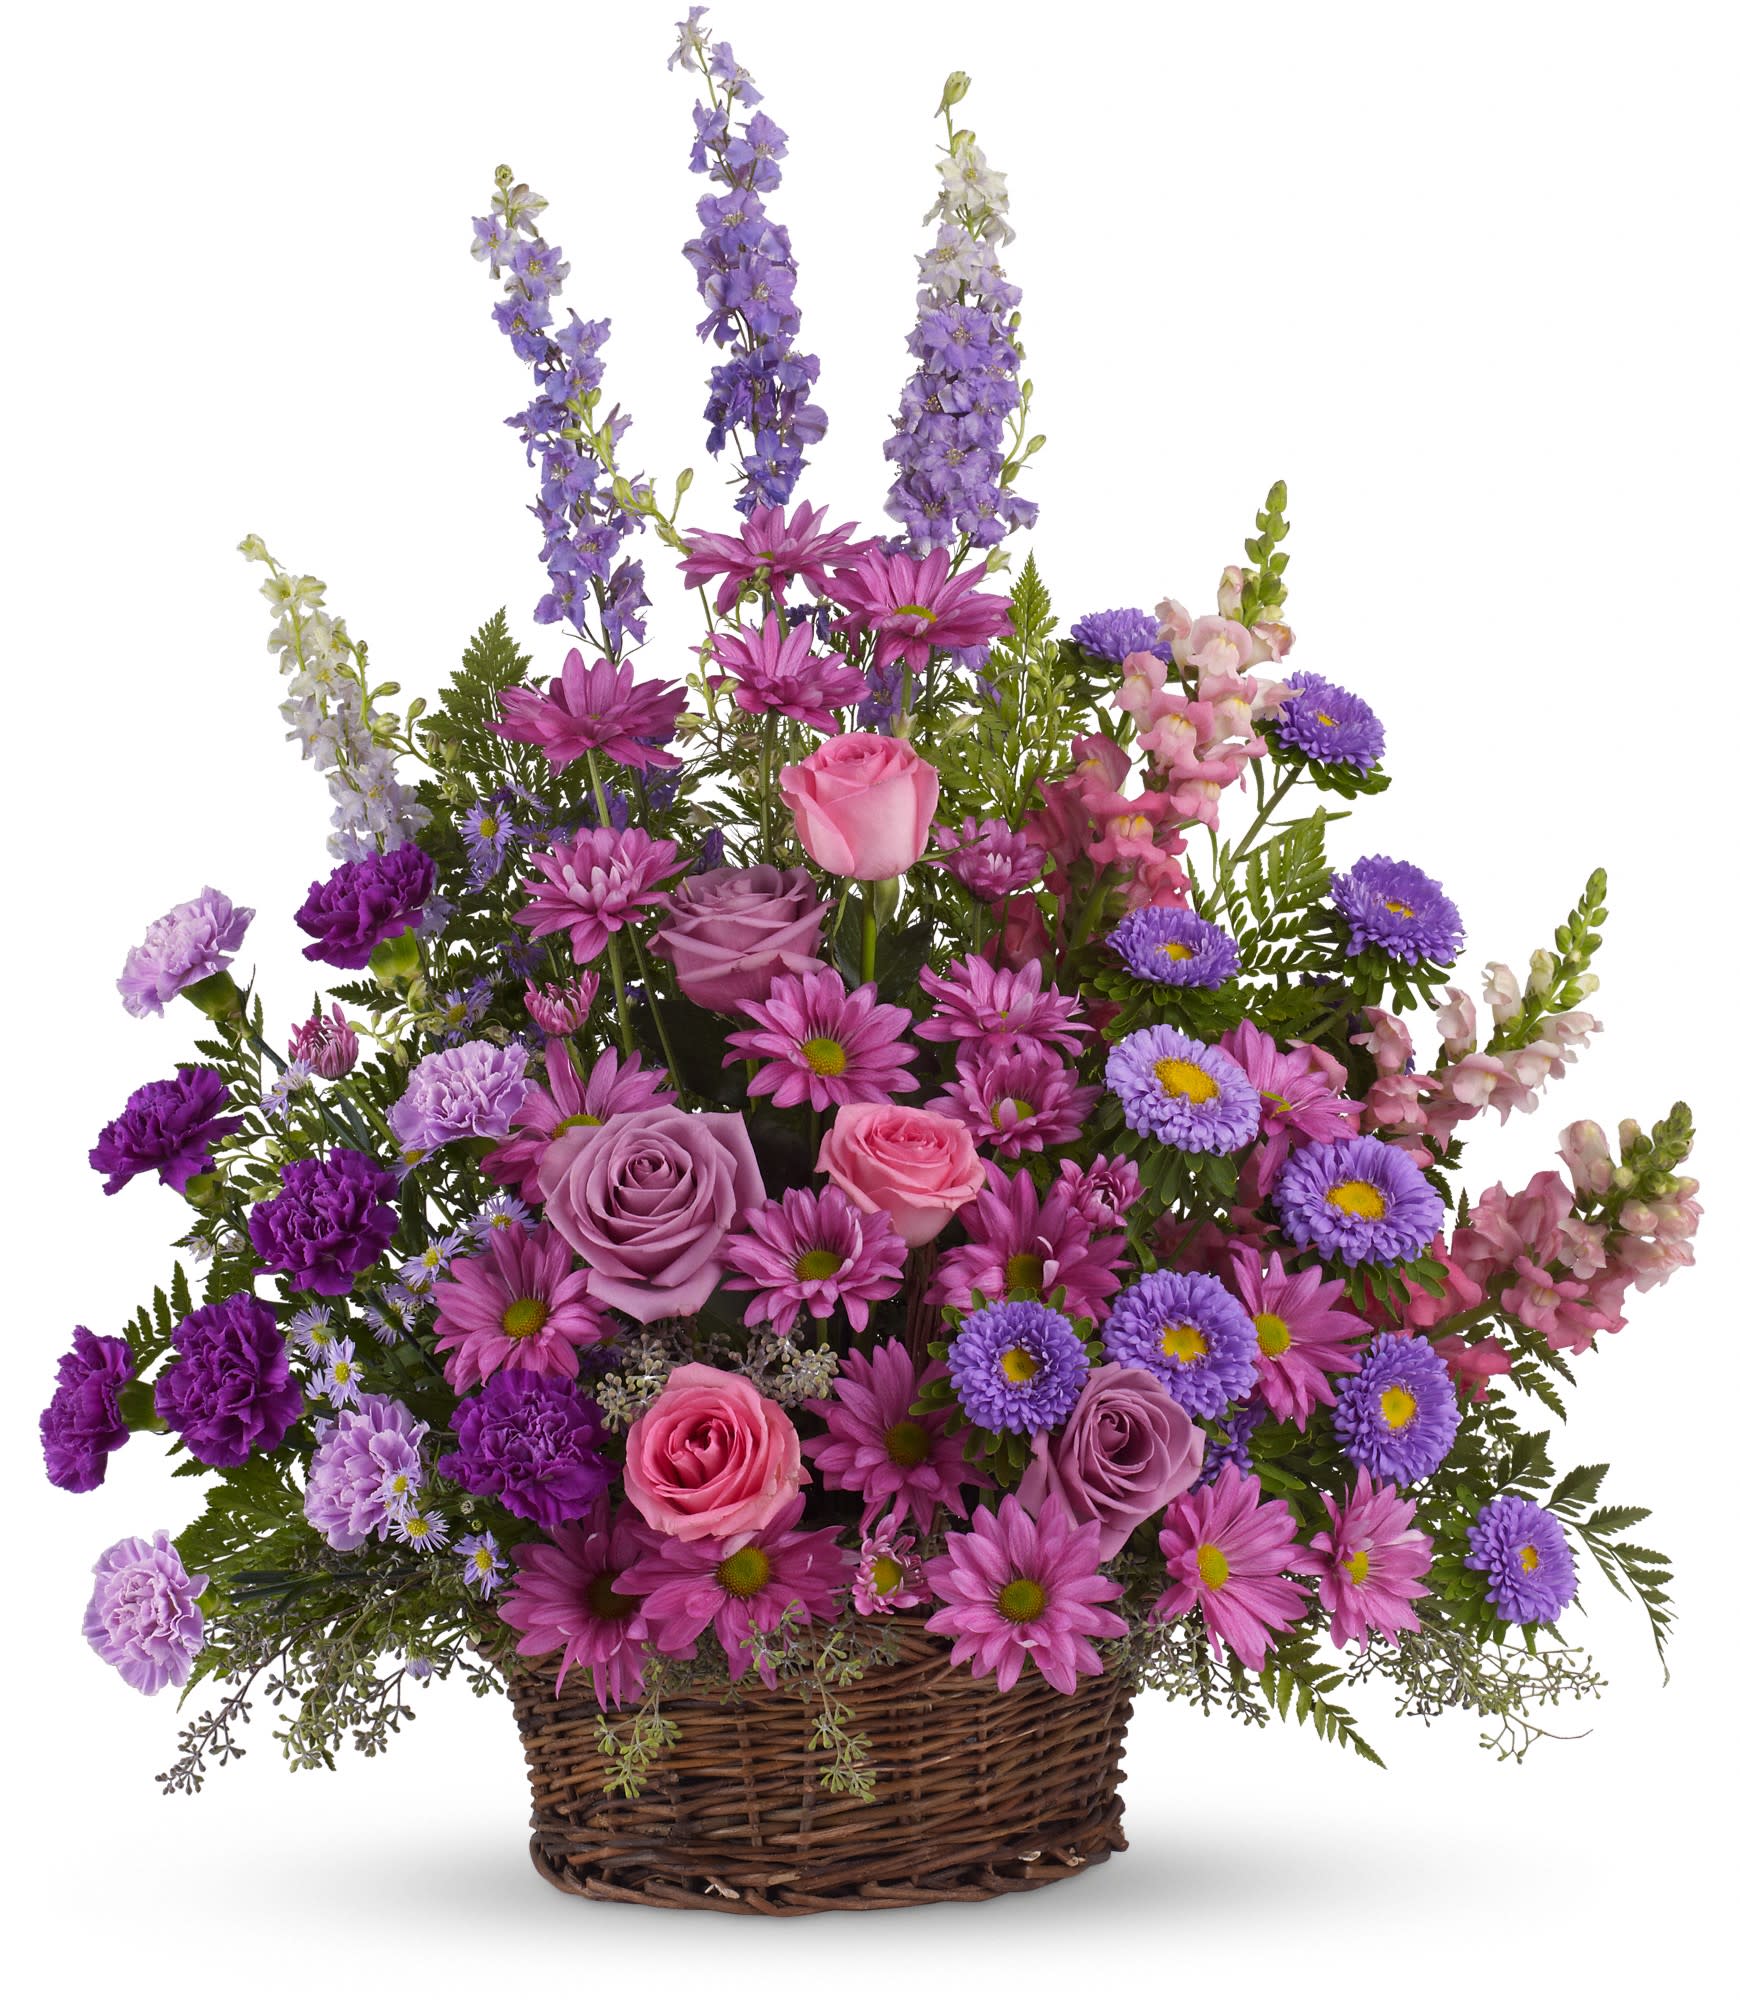 Gracious Lavender Basket - Soothing lavender, respectful purple and compassionate pinks are combined beautifully in this basket overflowing with pretty flowers, sincerity and sympathy. A lovely way to share your thoughts and pay tribute to someone special. 